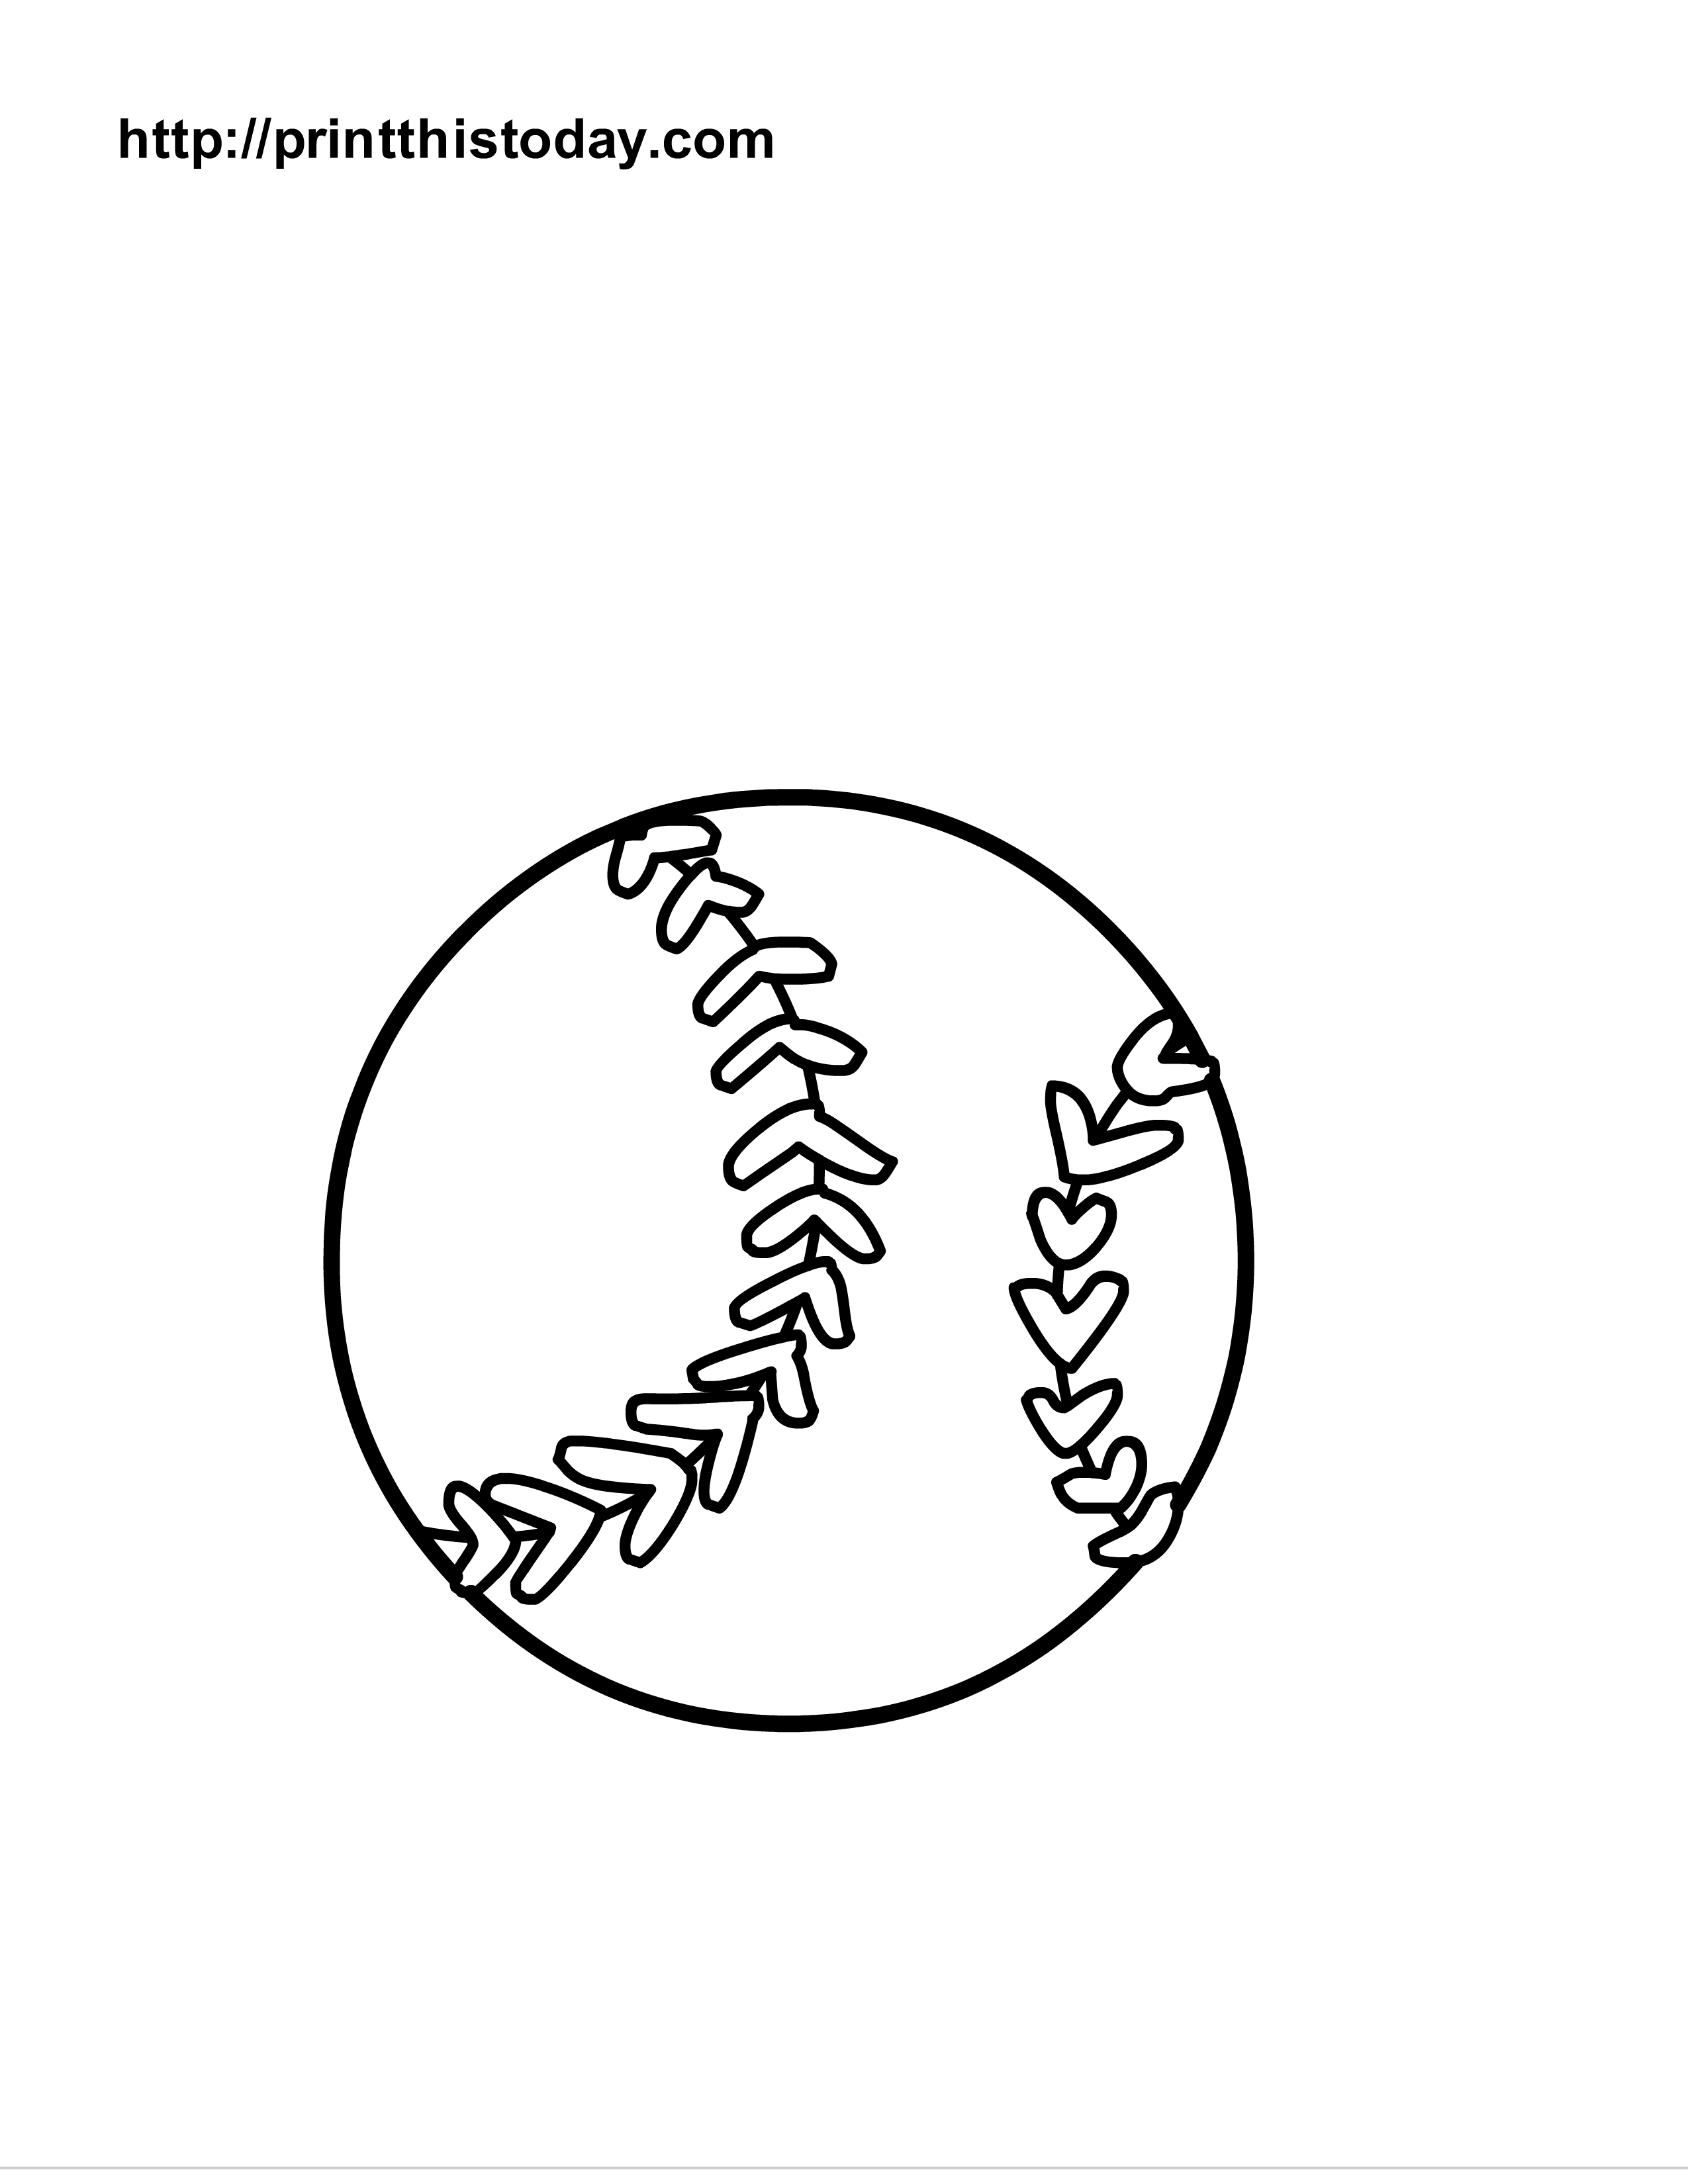 Download Free Printable Sports Balls Coloring Pages